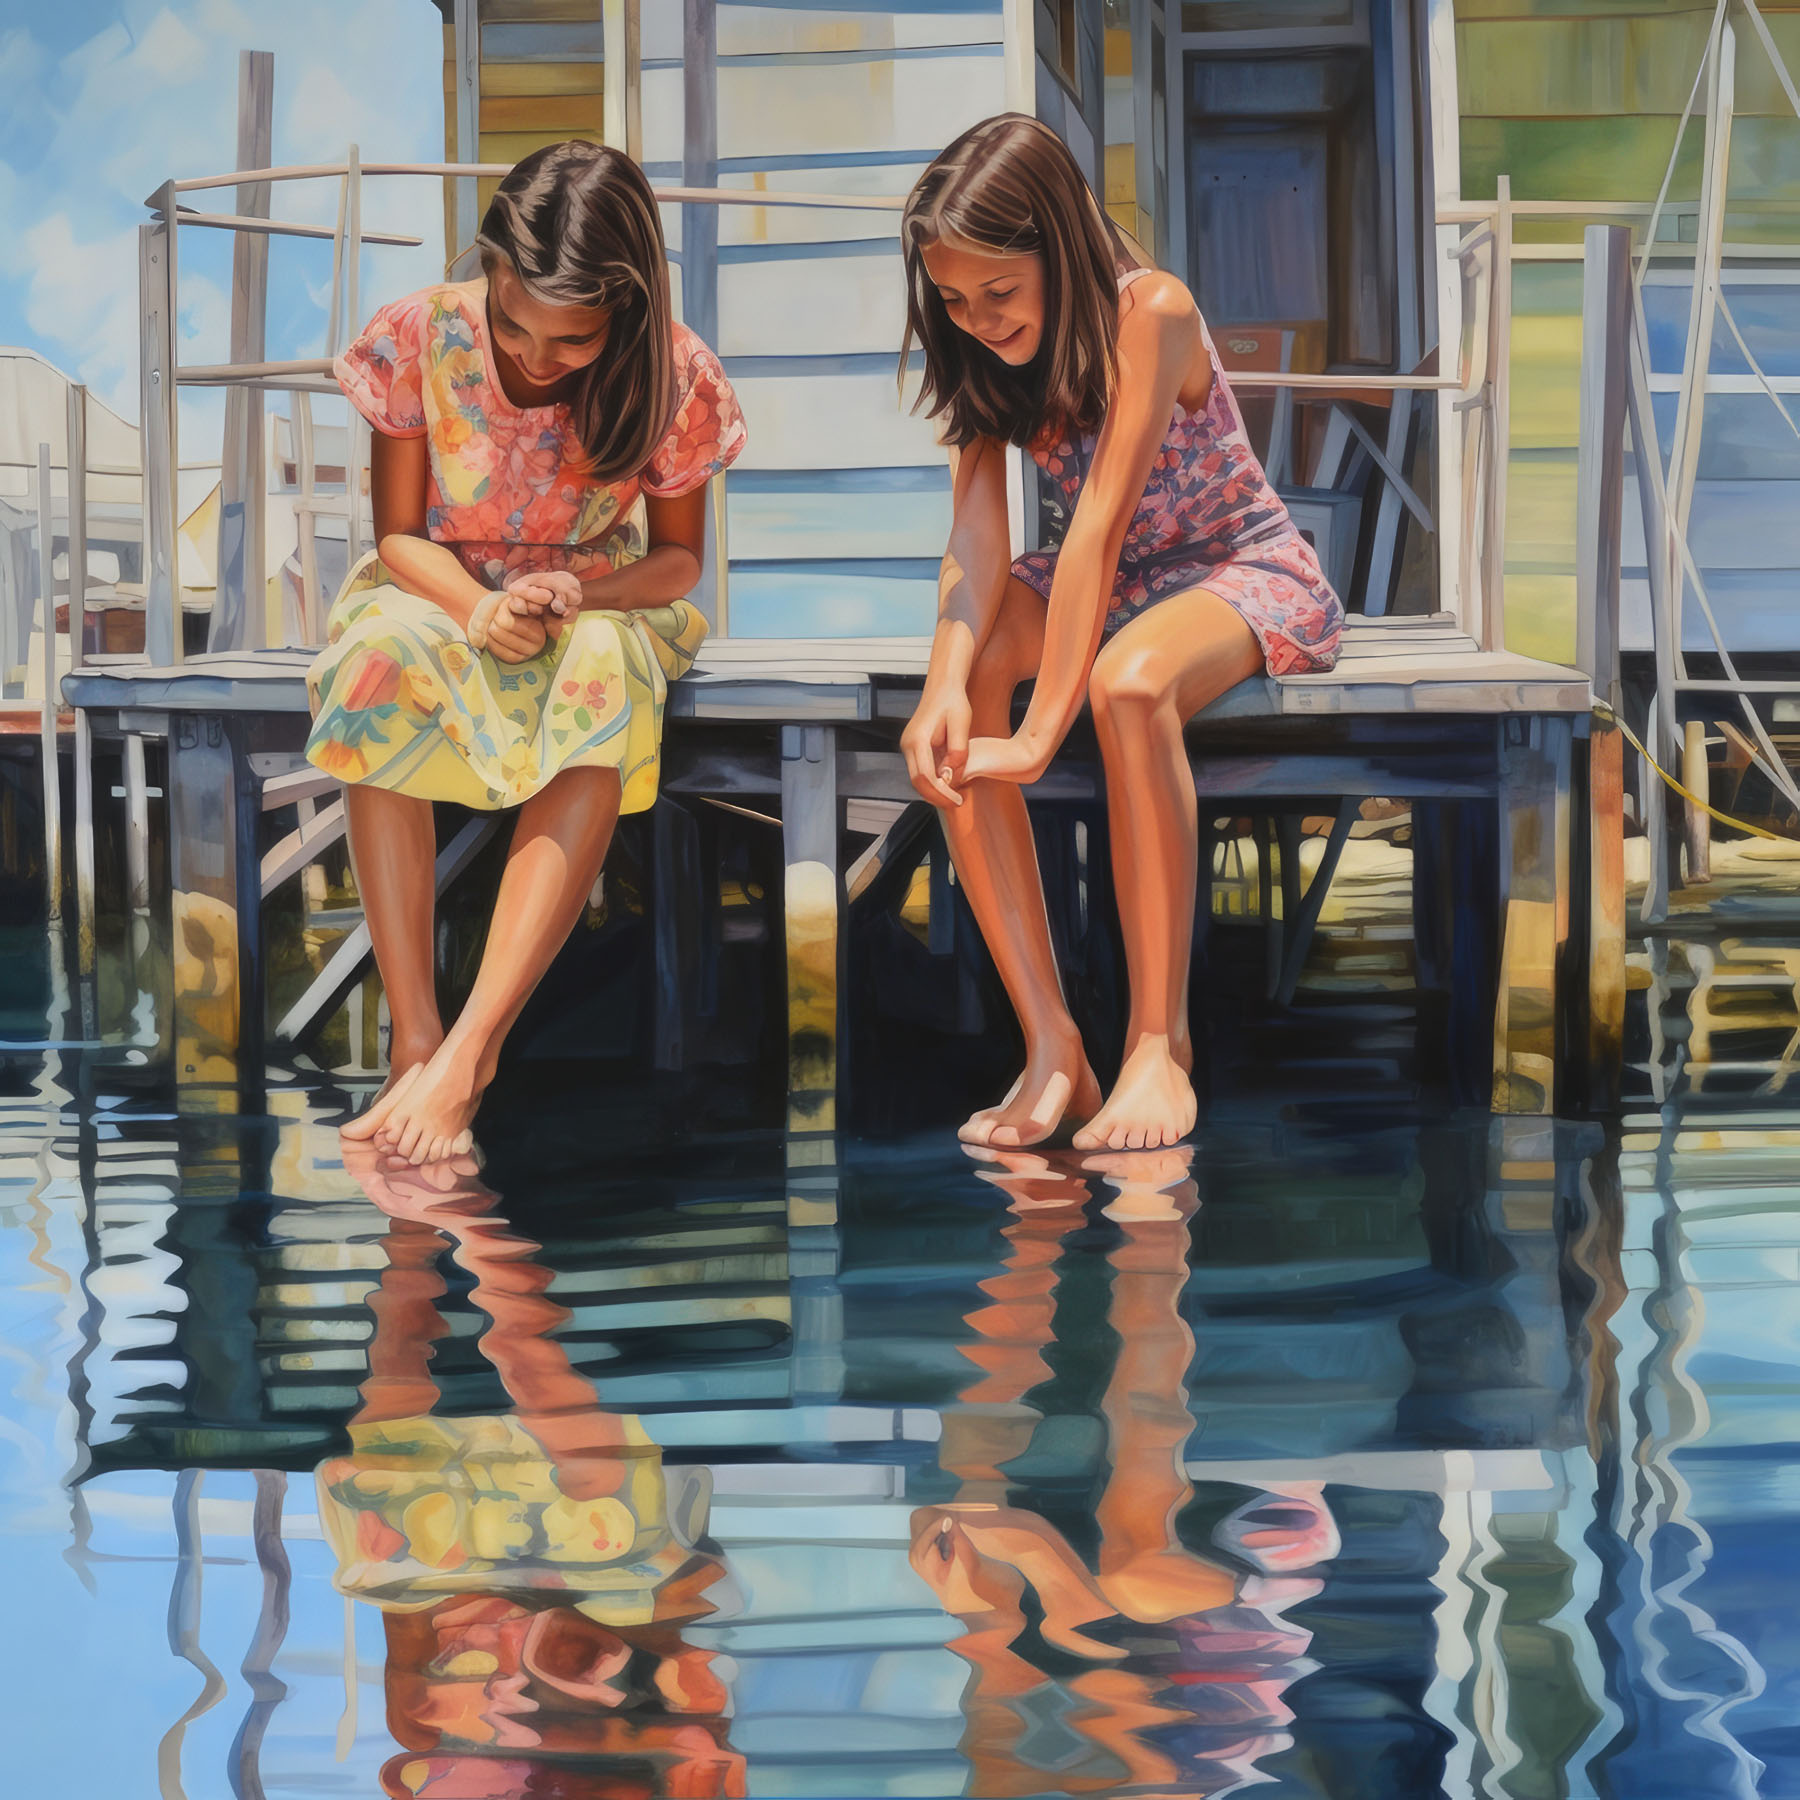 Two young girls sit on the edge of a wooden dock with a body of blue water beneath them.